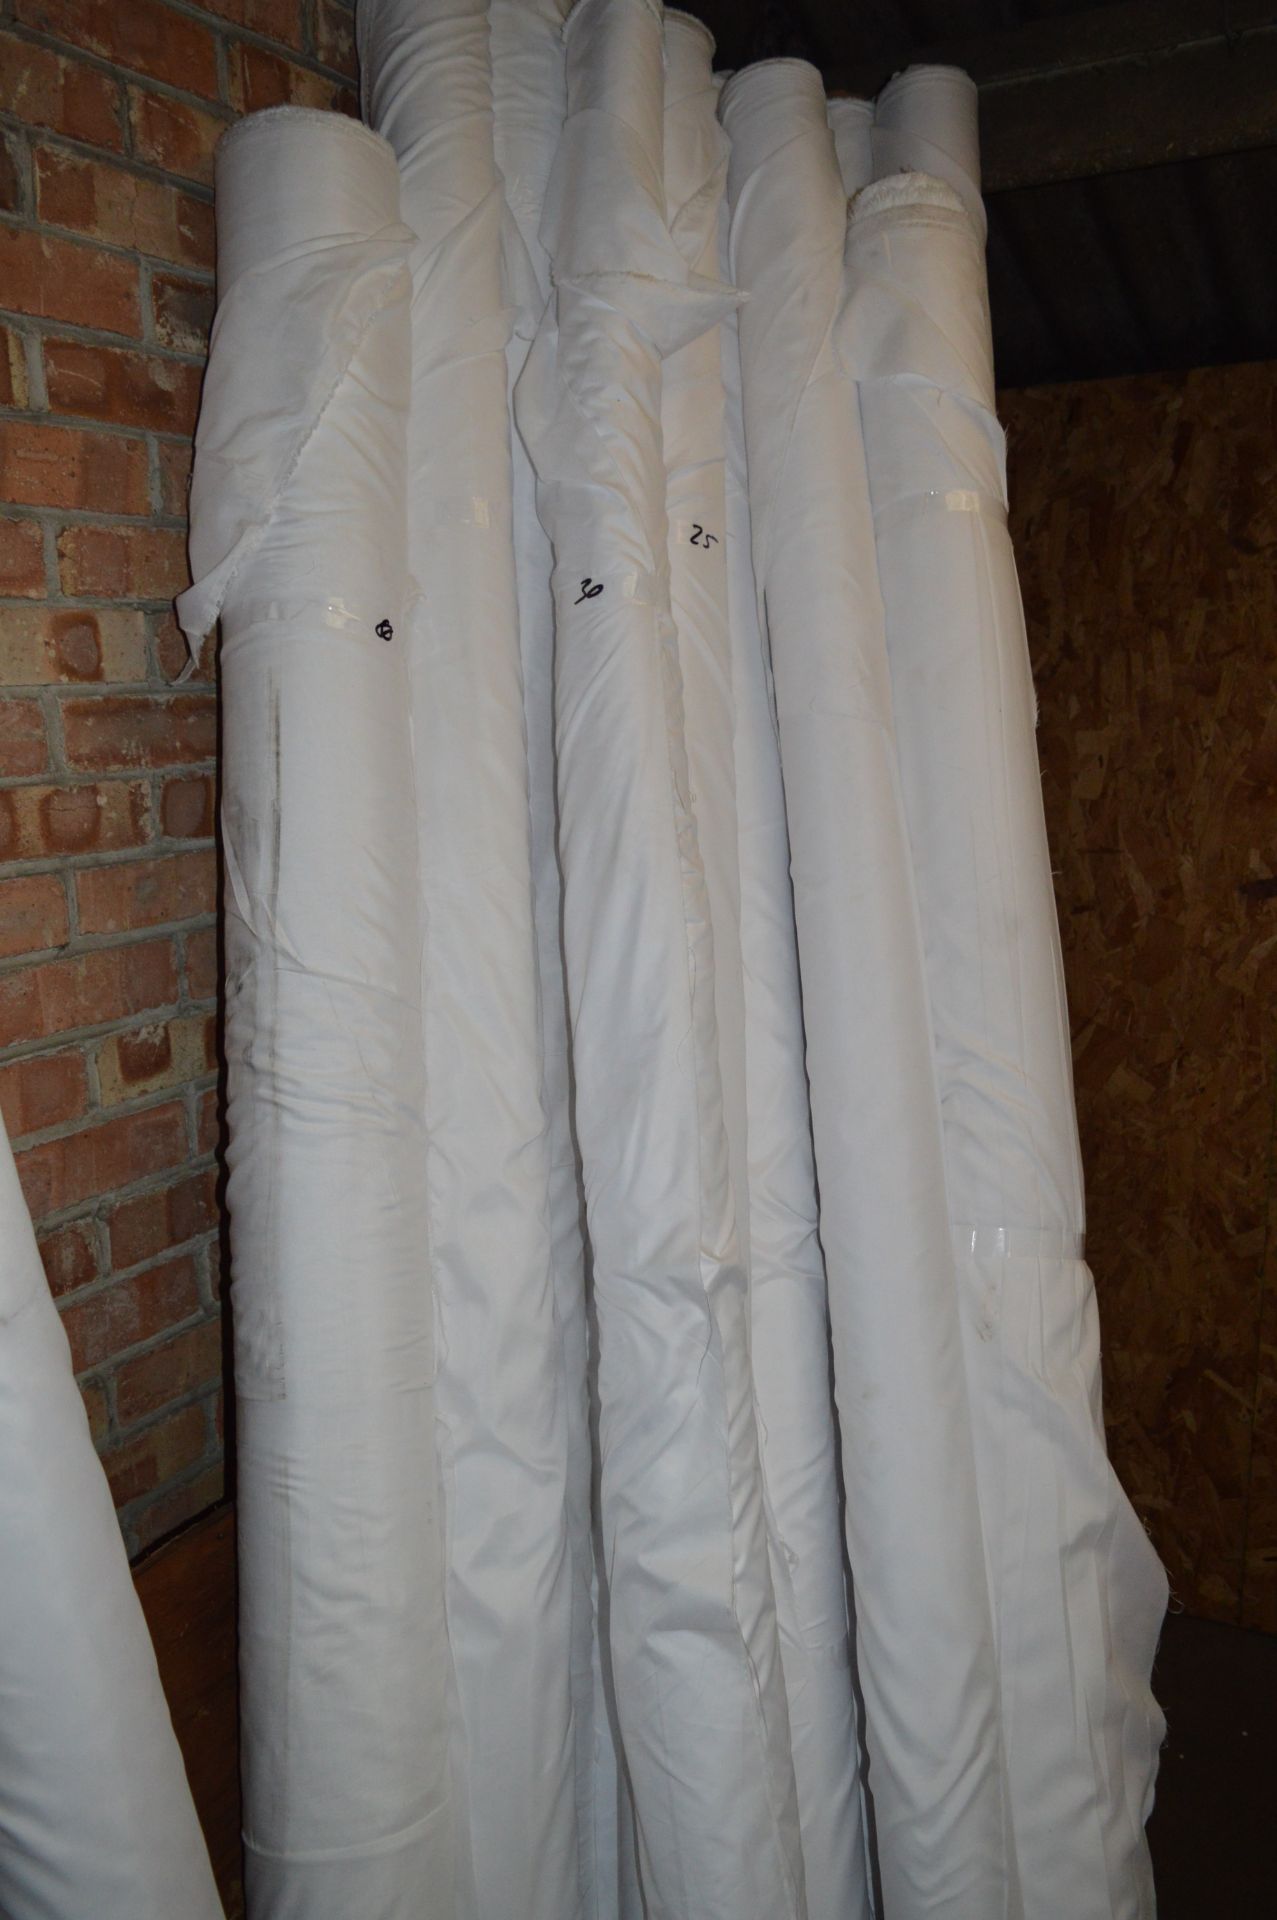 *100m by 90" of White Polyester Cloth